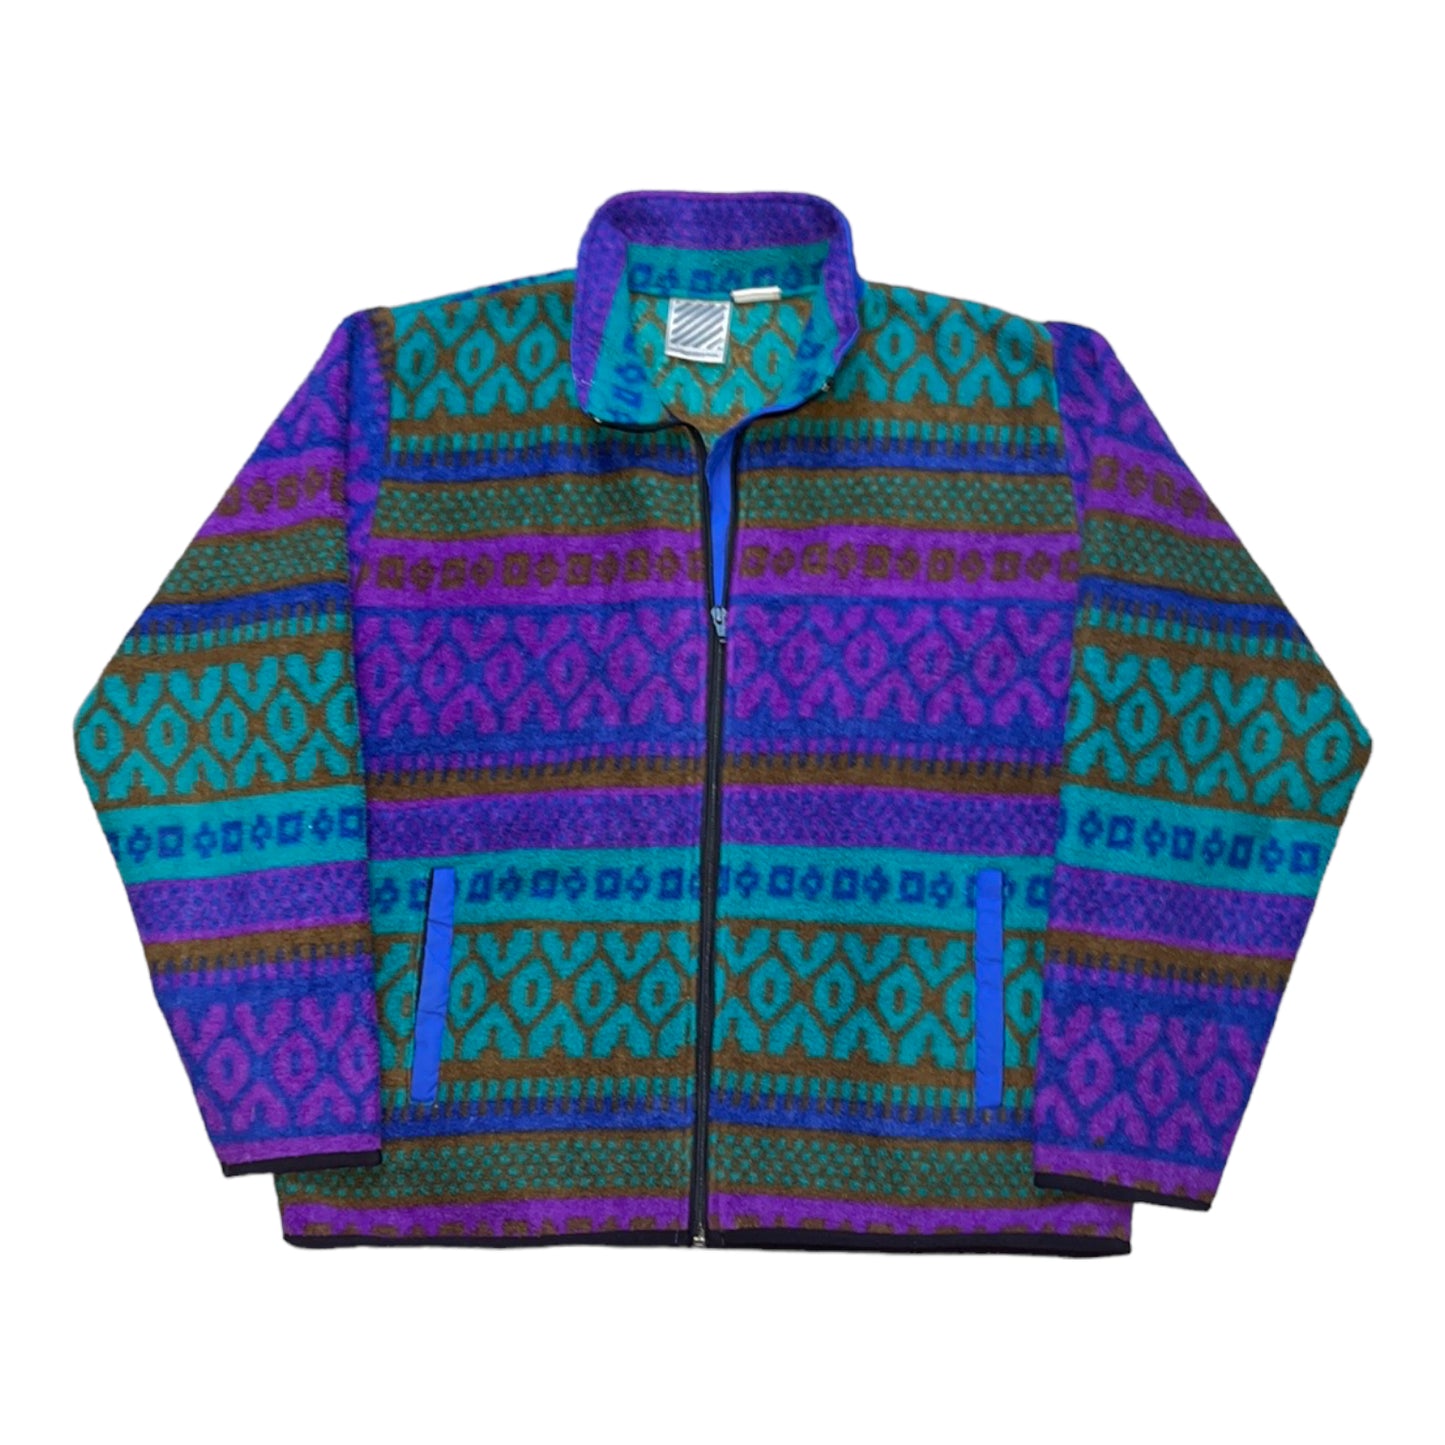 Vintage Colorful Patterned Full Zip Jacket - SMALL